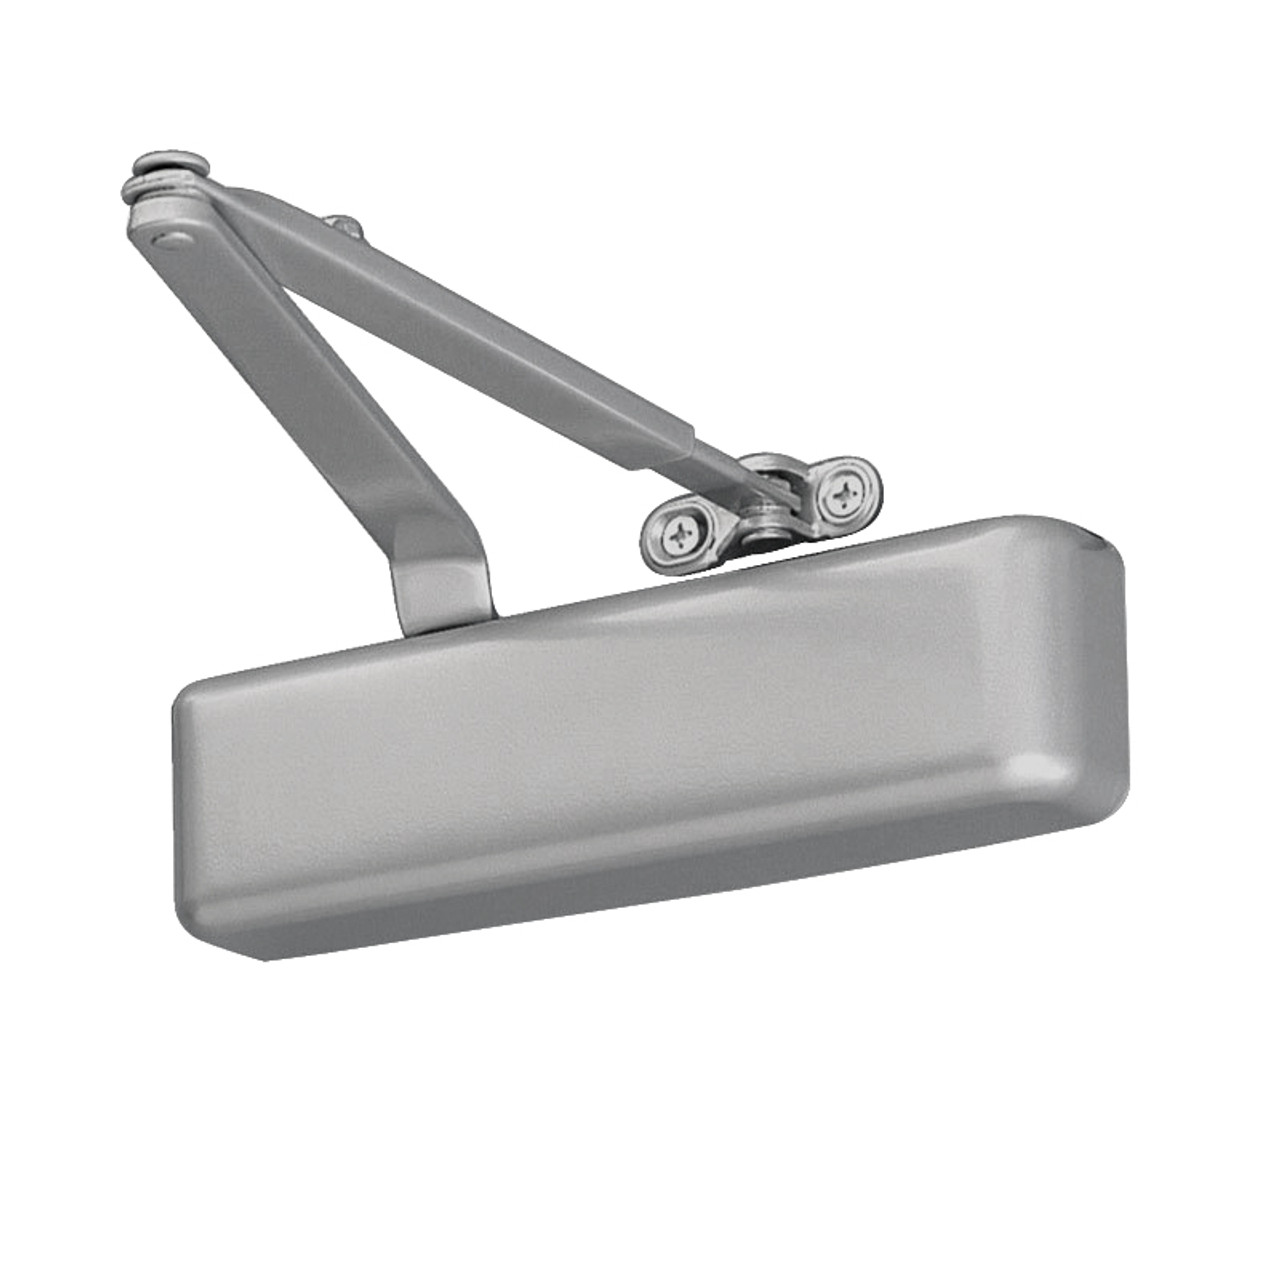 4031-H-US26D LCN Door Closer with Hold Open Arm in Satin Chrome Finish